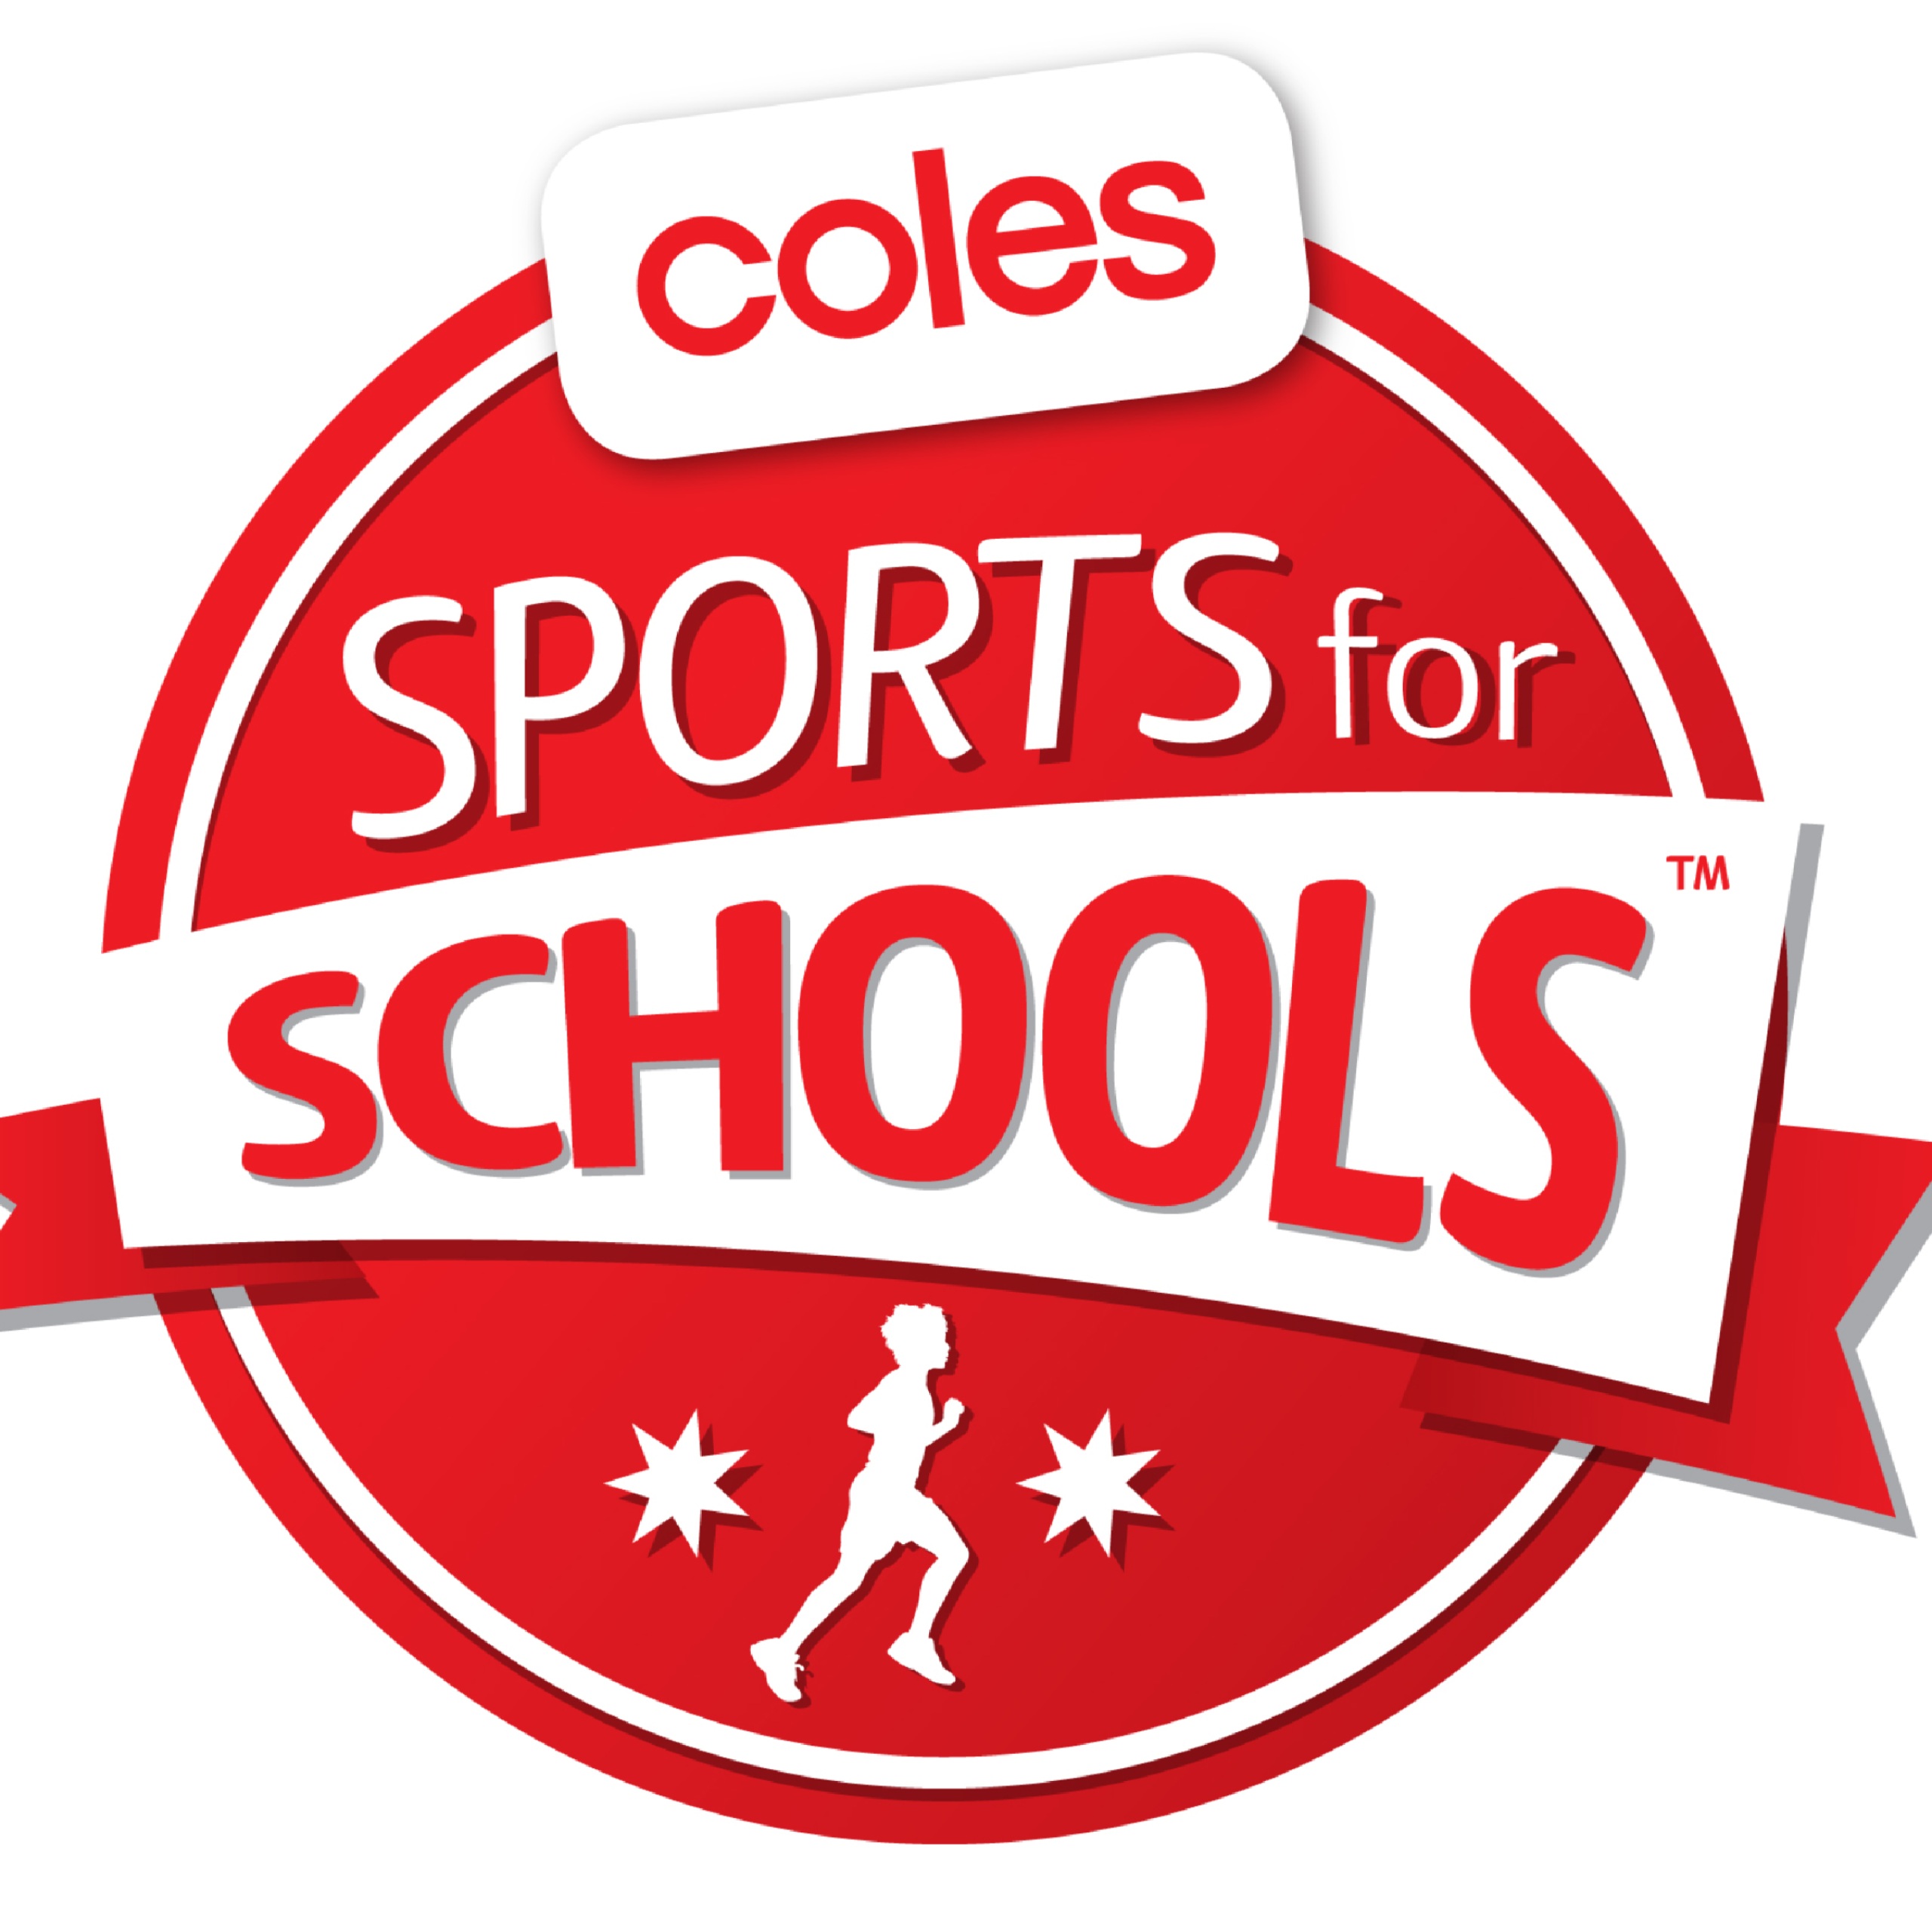 Sports for Schools!